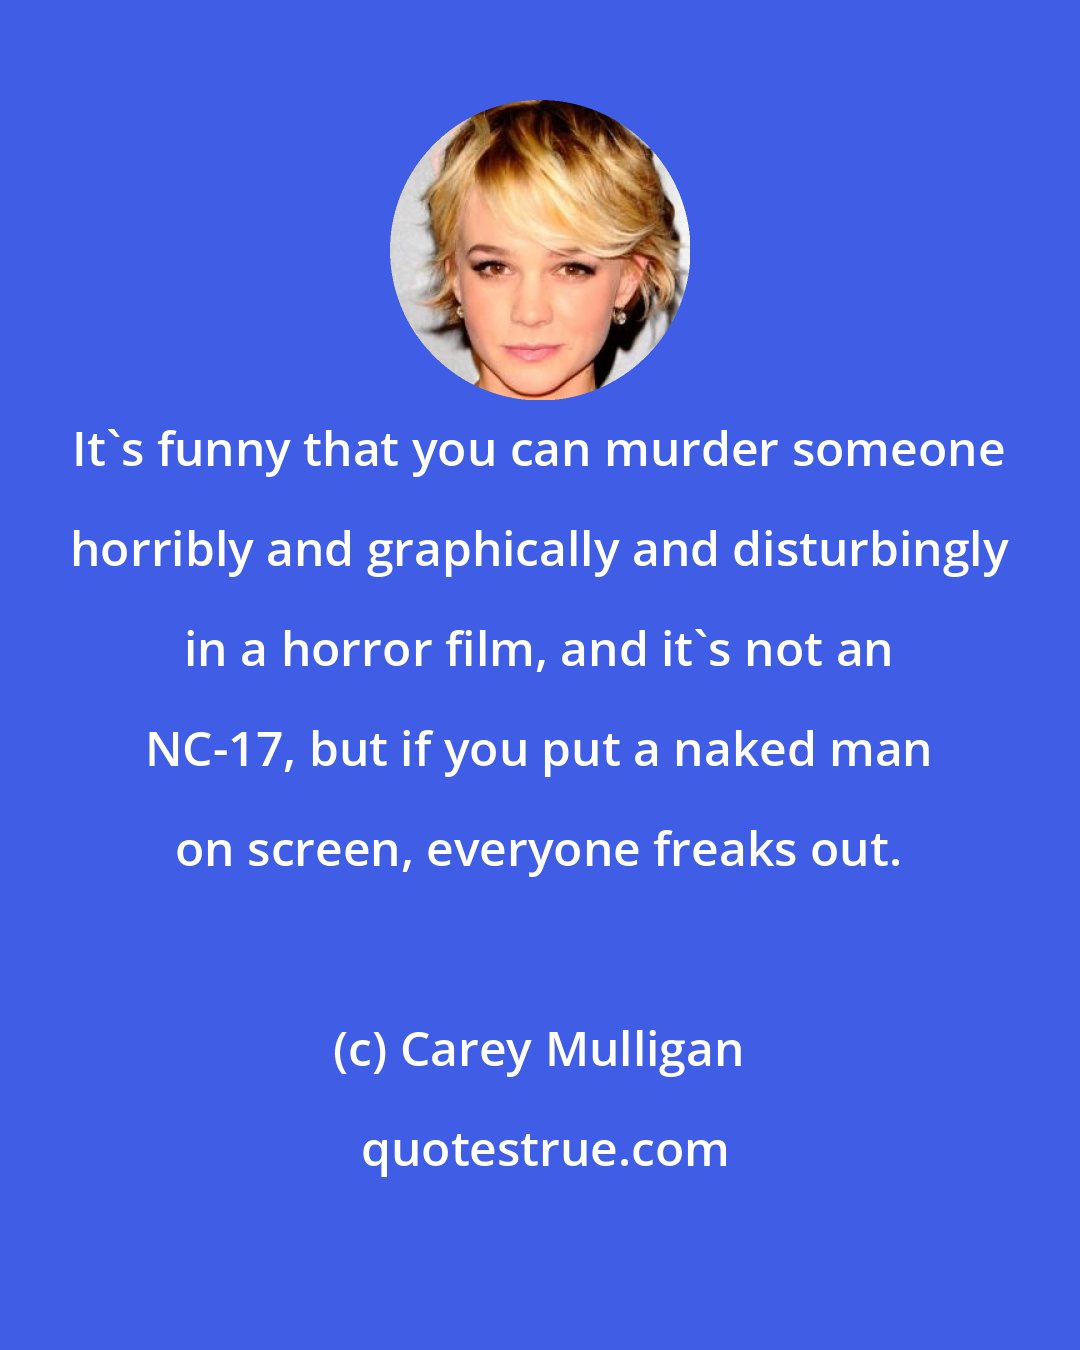 Carey Mulligan: It's funny that you can murder someone horribly and graphically and disturbingly in a horror film, and it's not an NC-17, but if you put a naked man on screen, everyone freaks out.